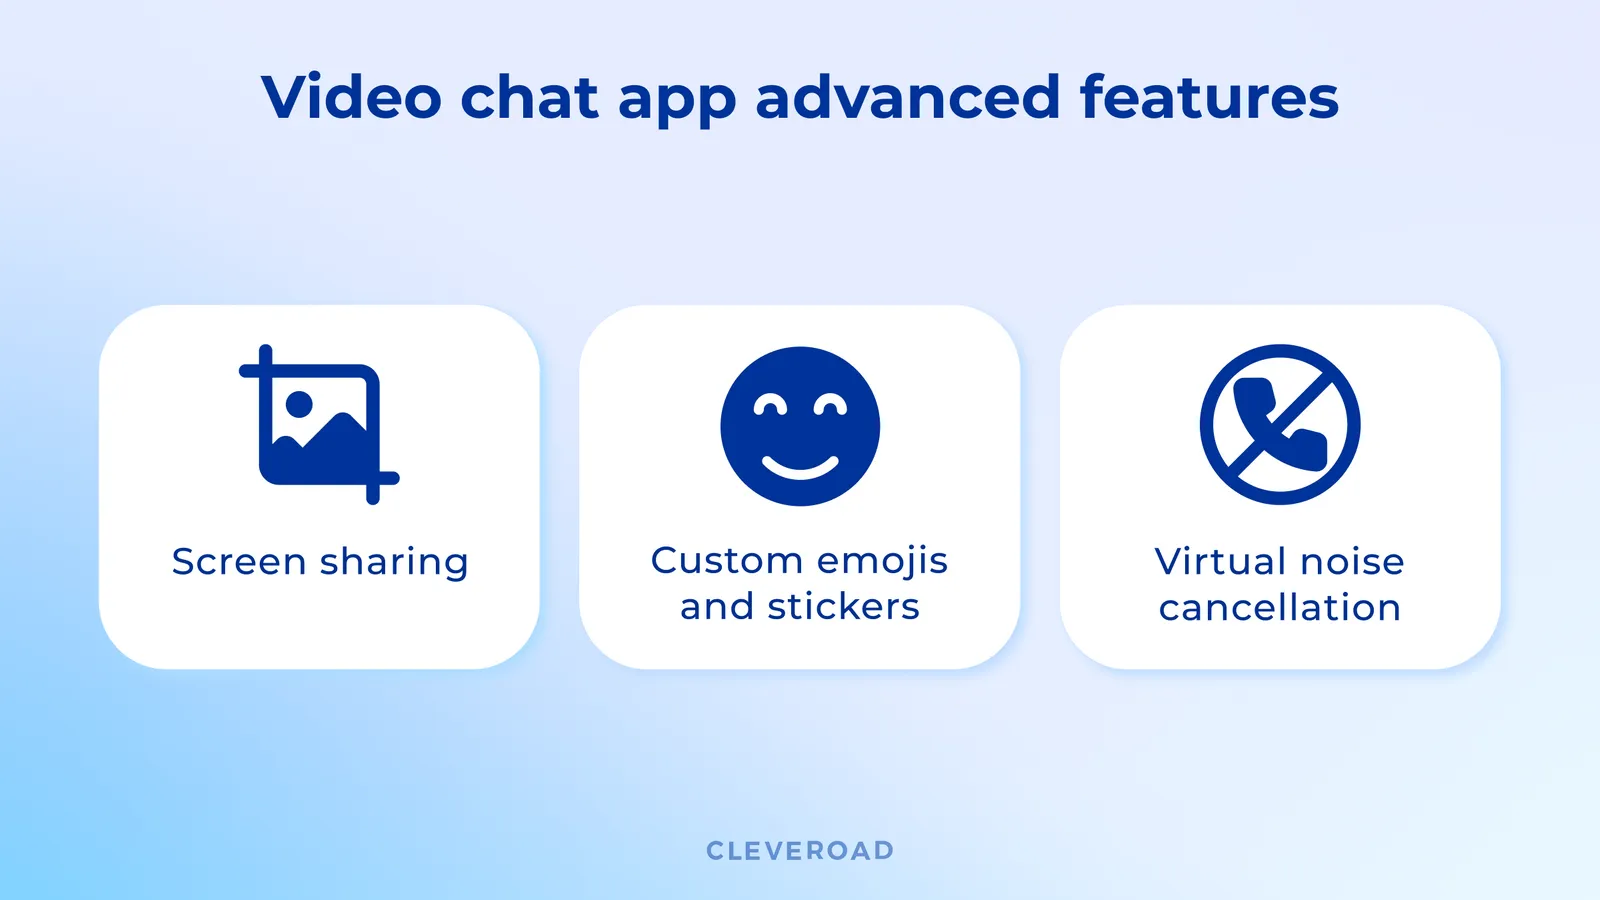 Build a Video Chat App - Types, Cost, & Features